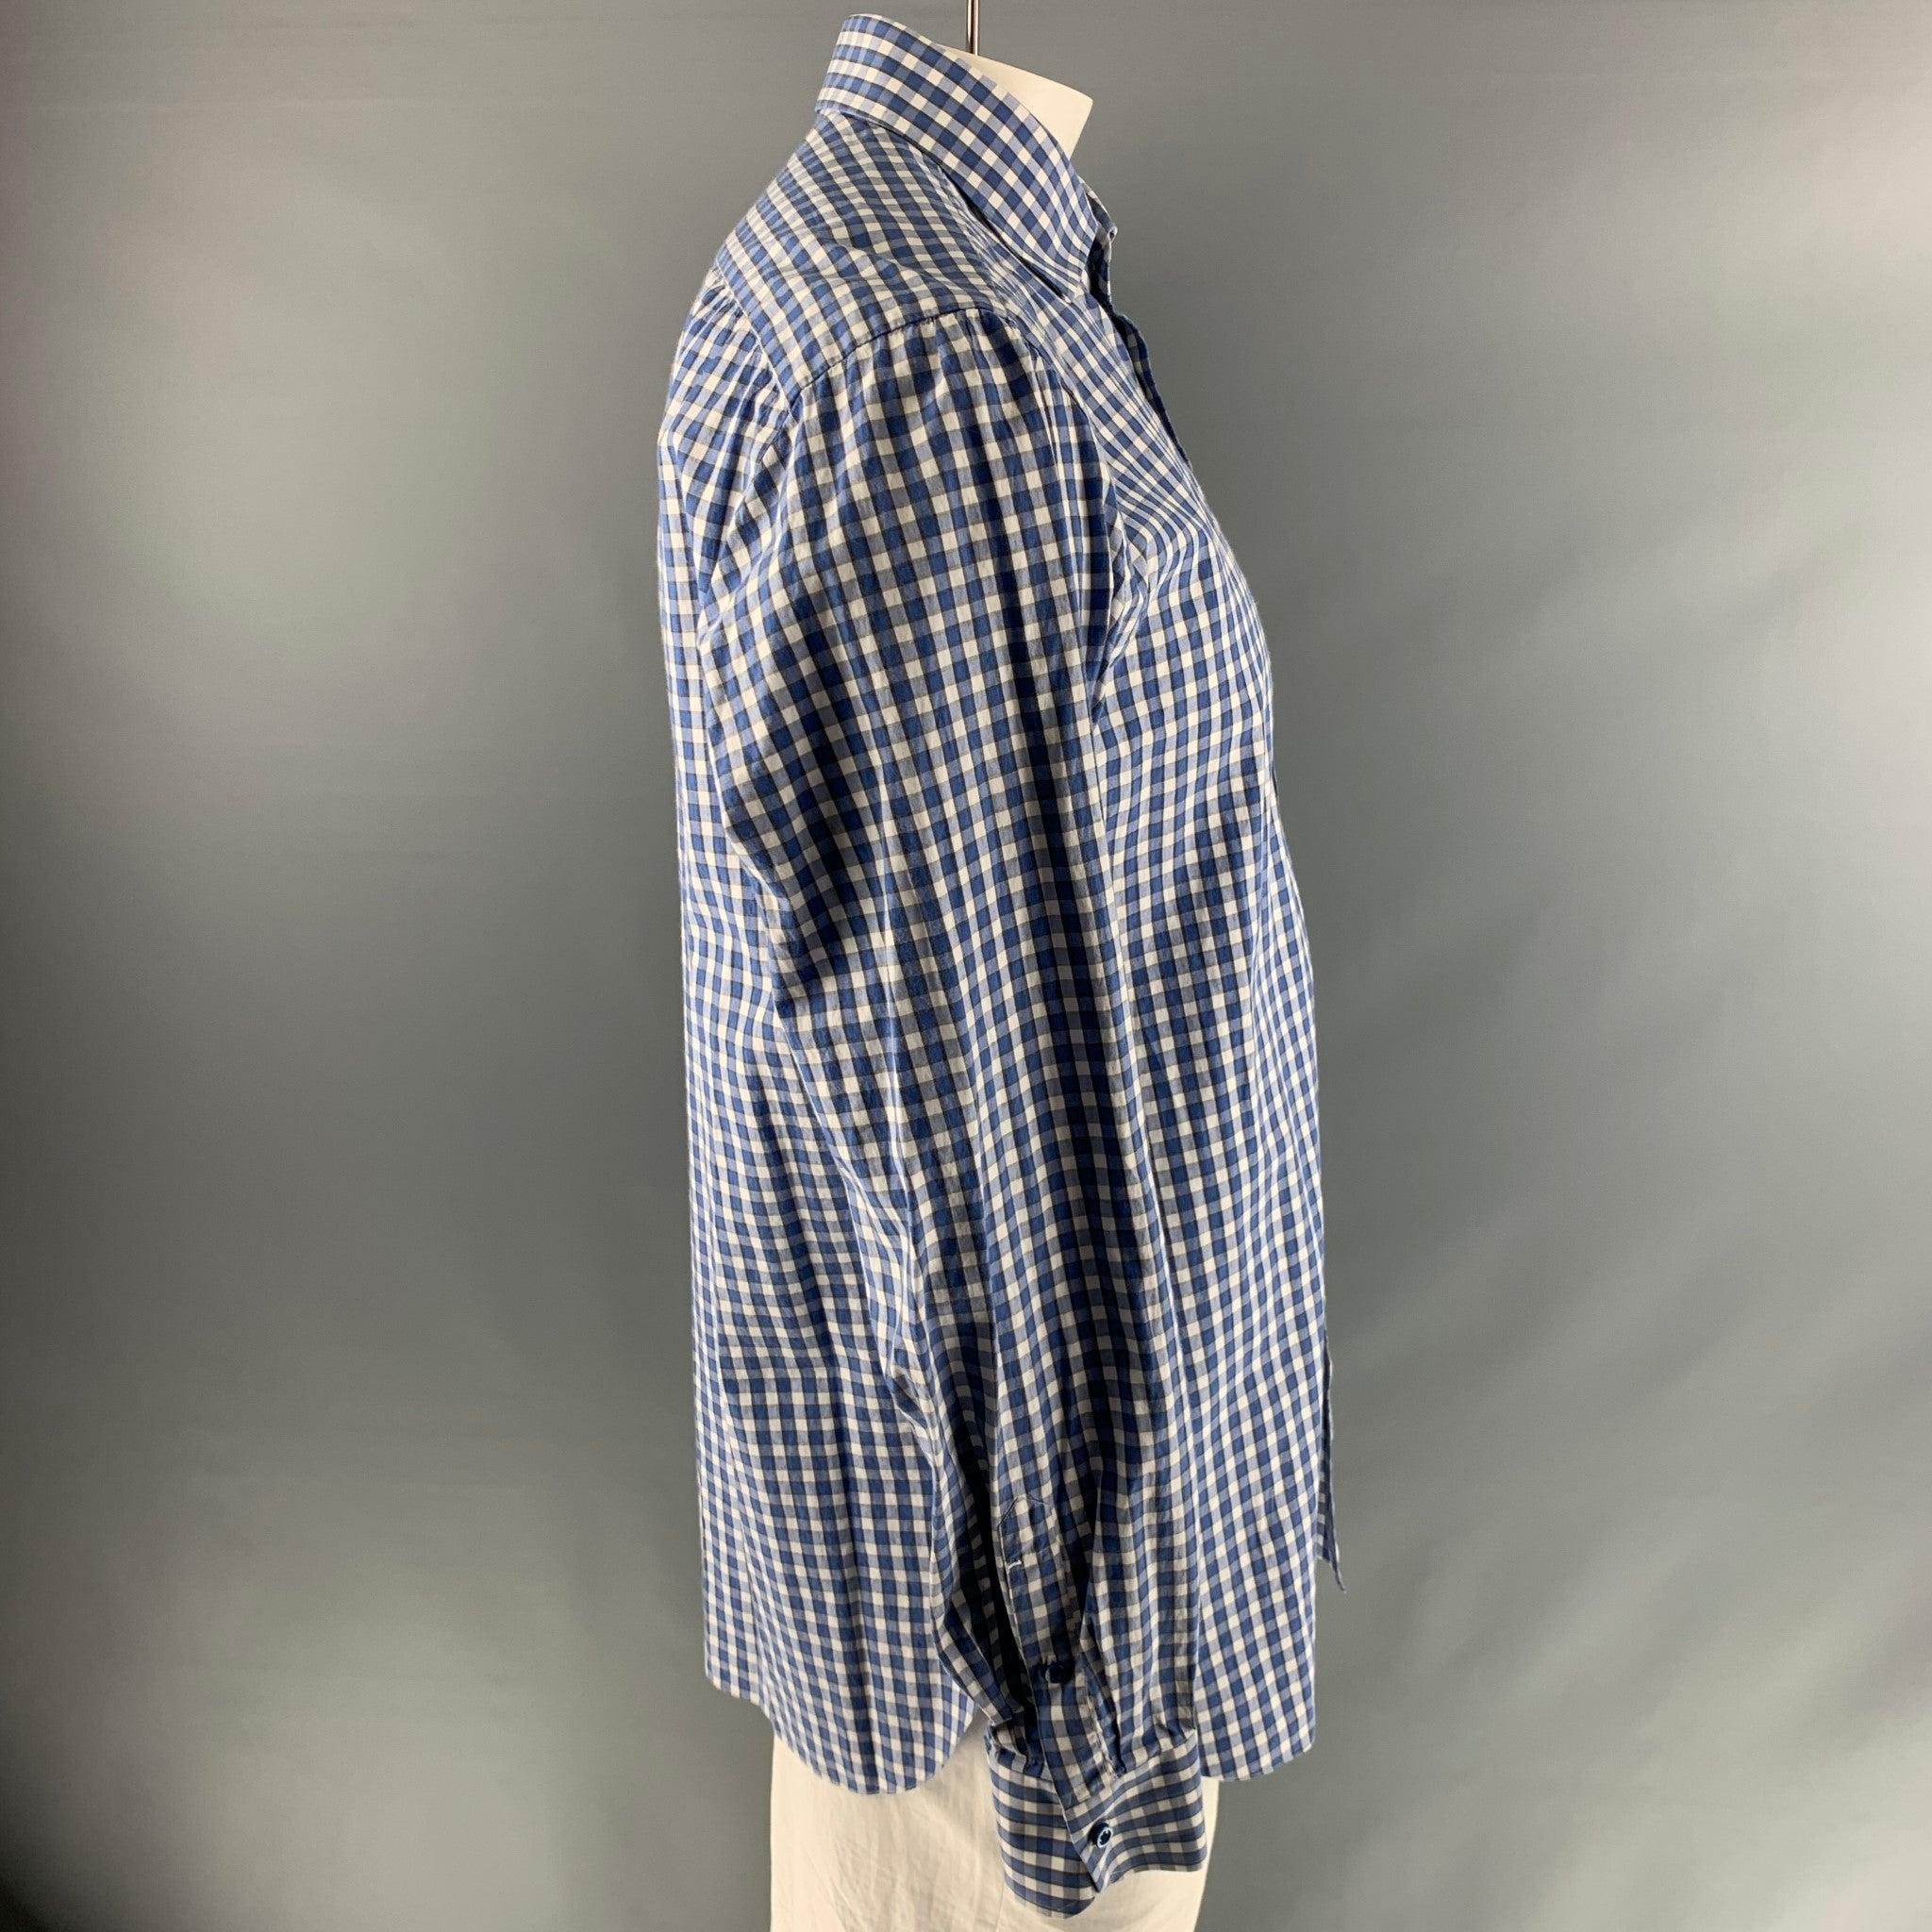 ISAIA long sleeve shirt comes in 100% cotton with a blue & white checkered design. It features a spread collar, and a button up closure.Very Good Pre-Owned Condition. 

Marked:   XL 

Measurements: 
 
Shoulder: 19 inches Chest: 50 inches Sleeve: 25